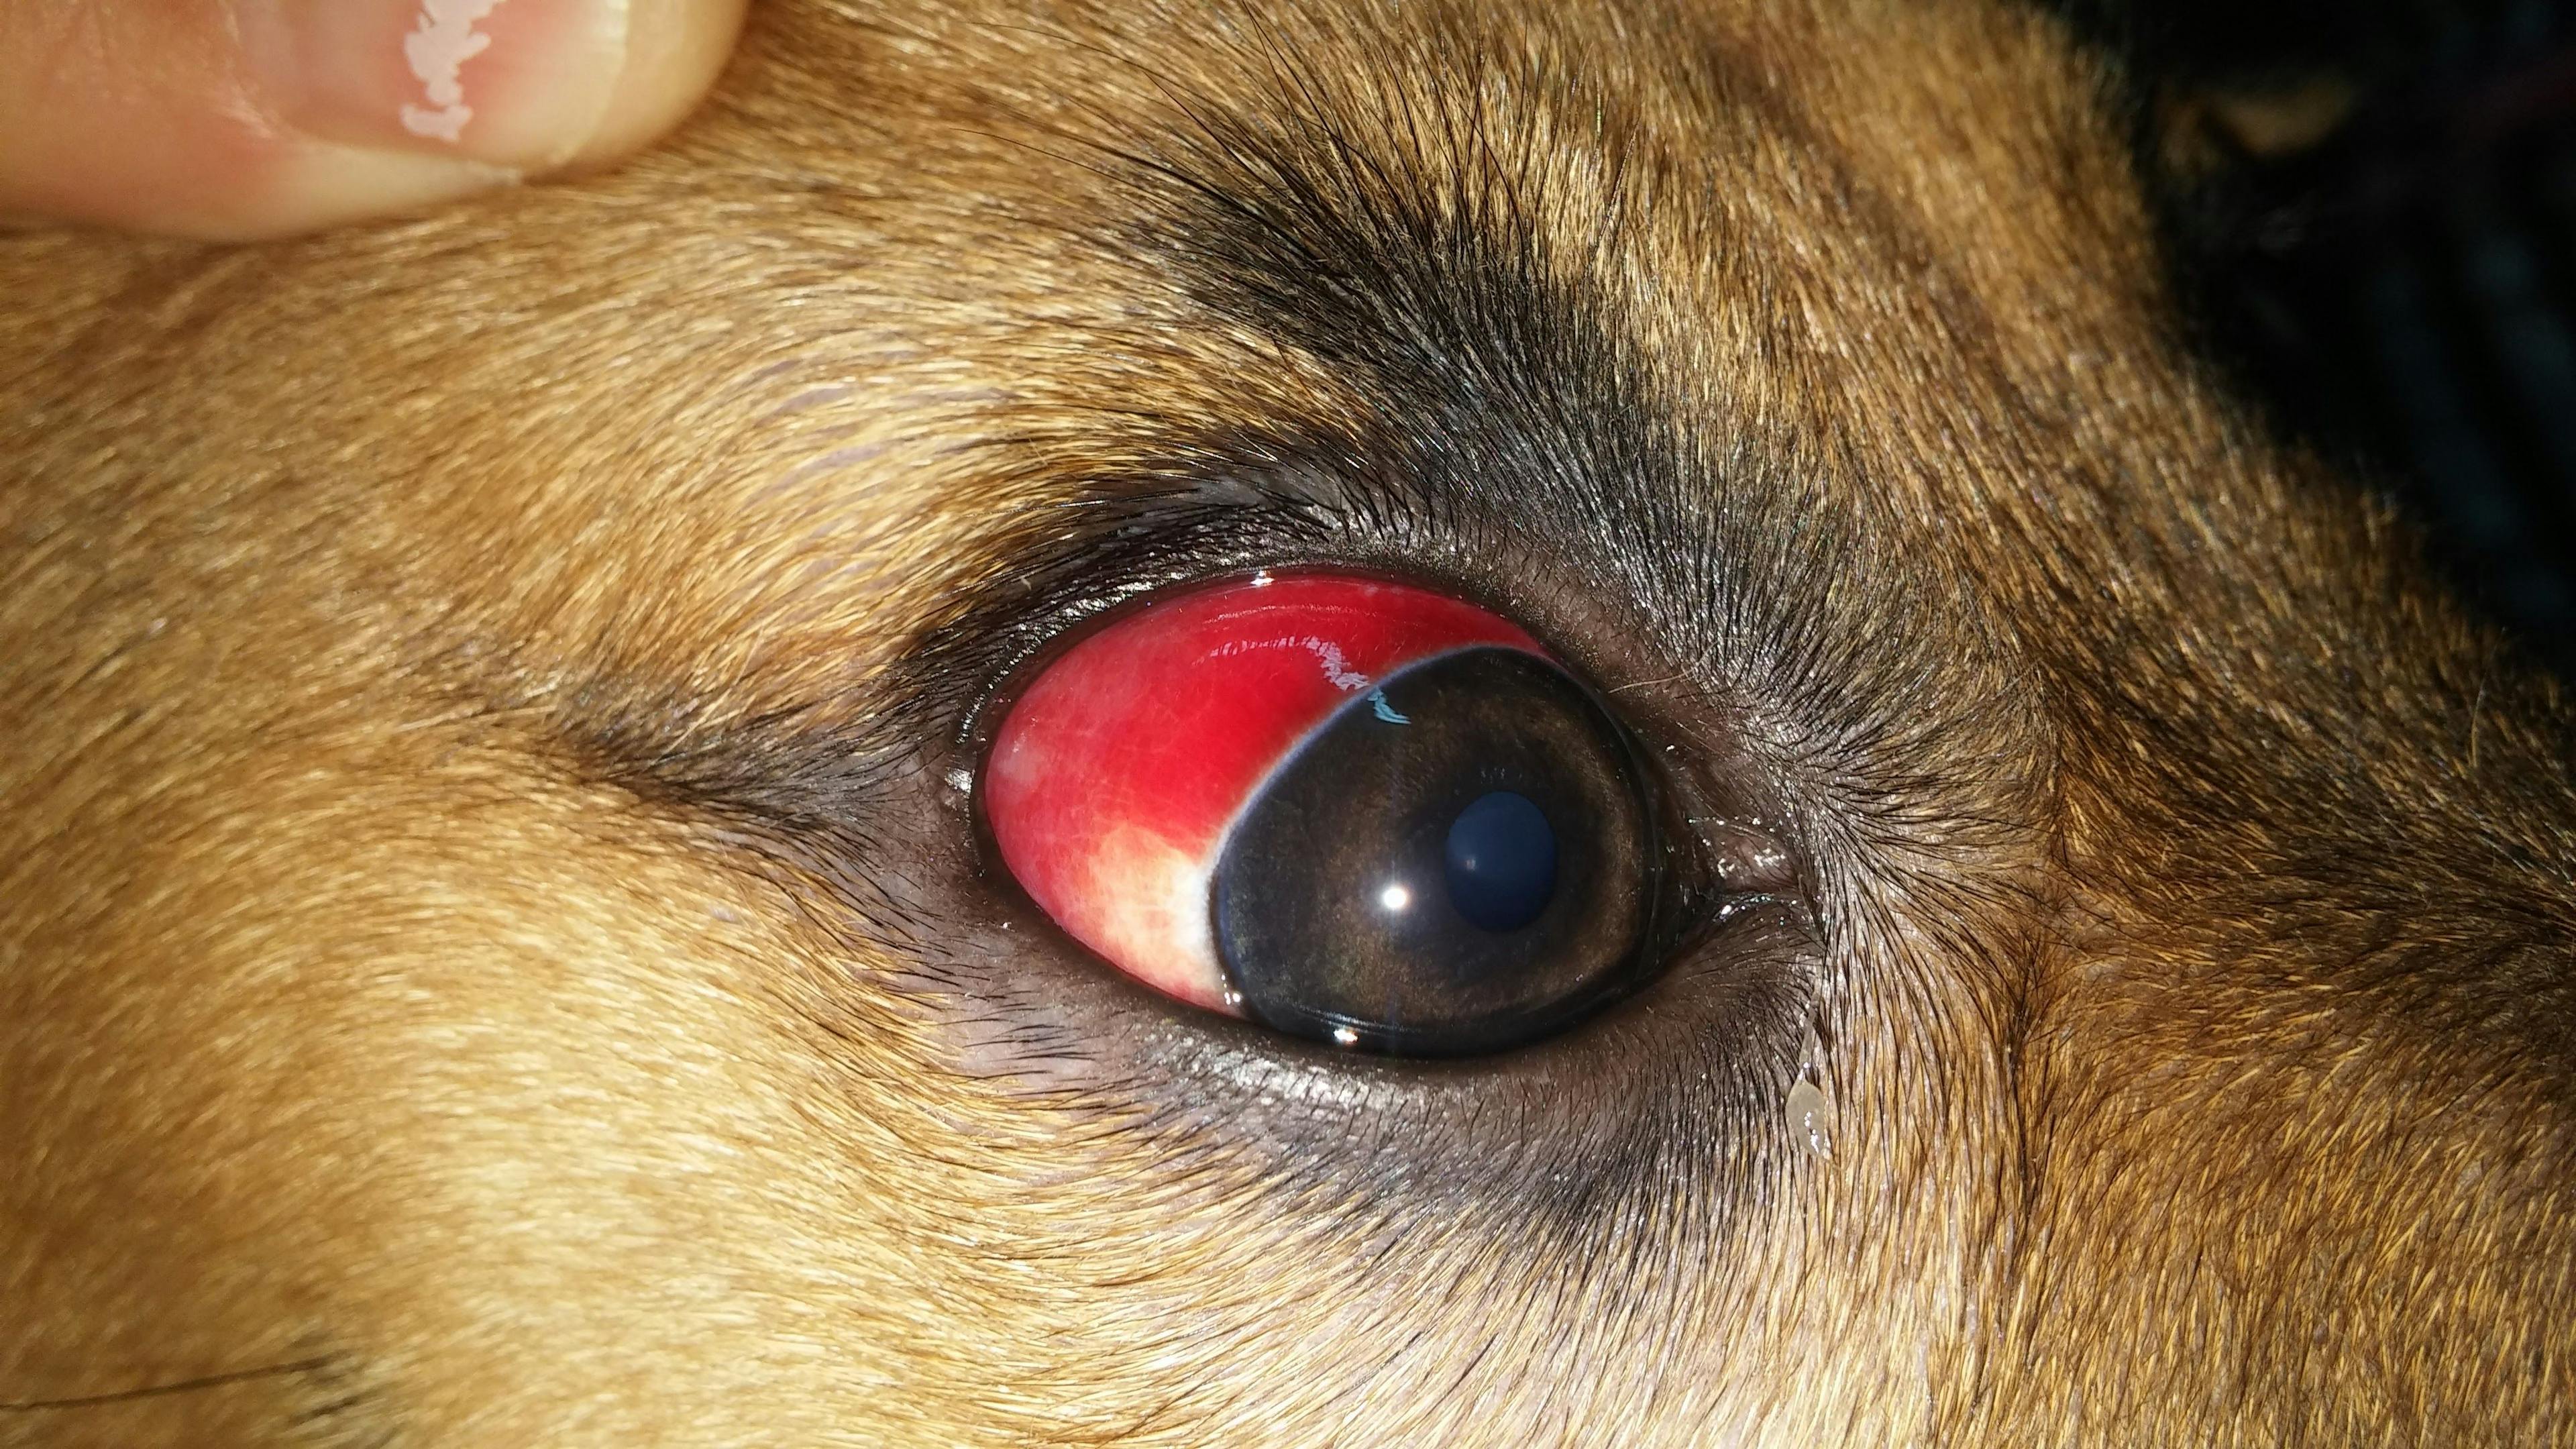 Figure 5. Subconjunctival hemorrhage in a dog due to anticoagulant poisoning.